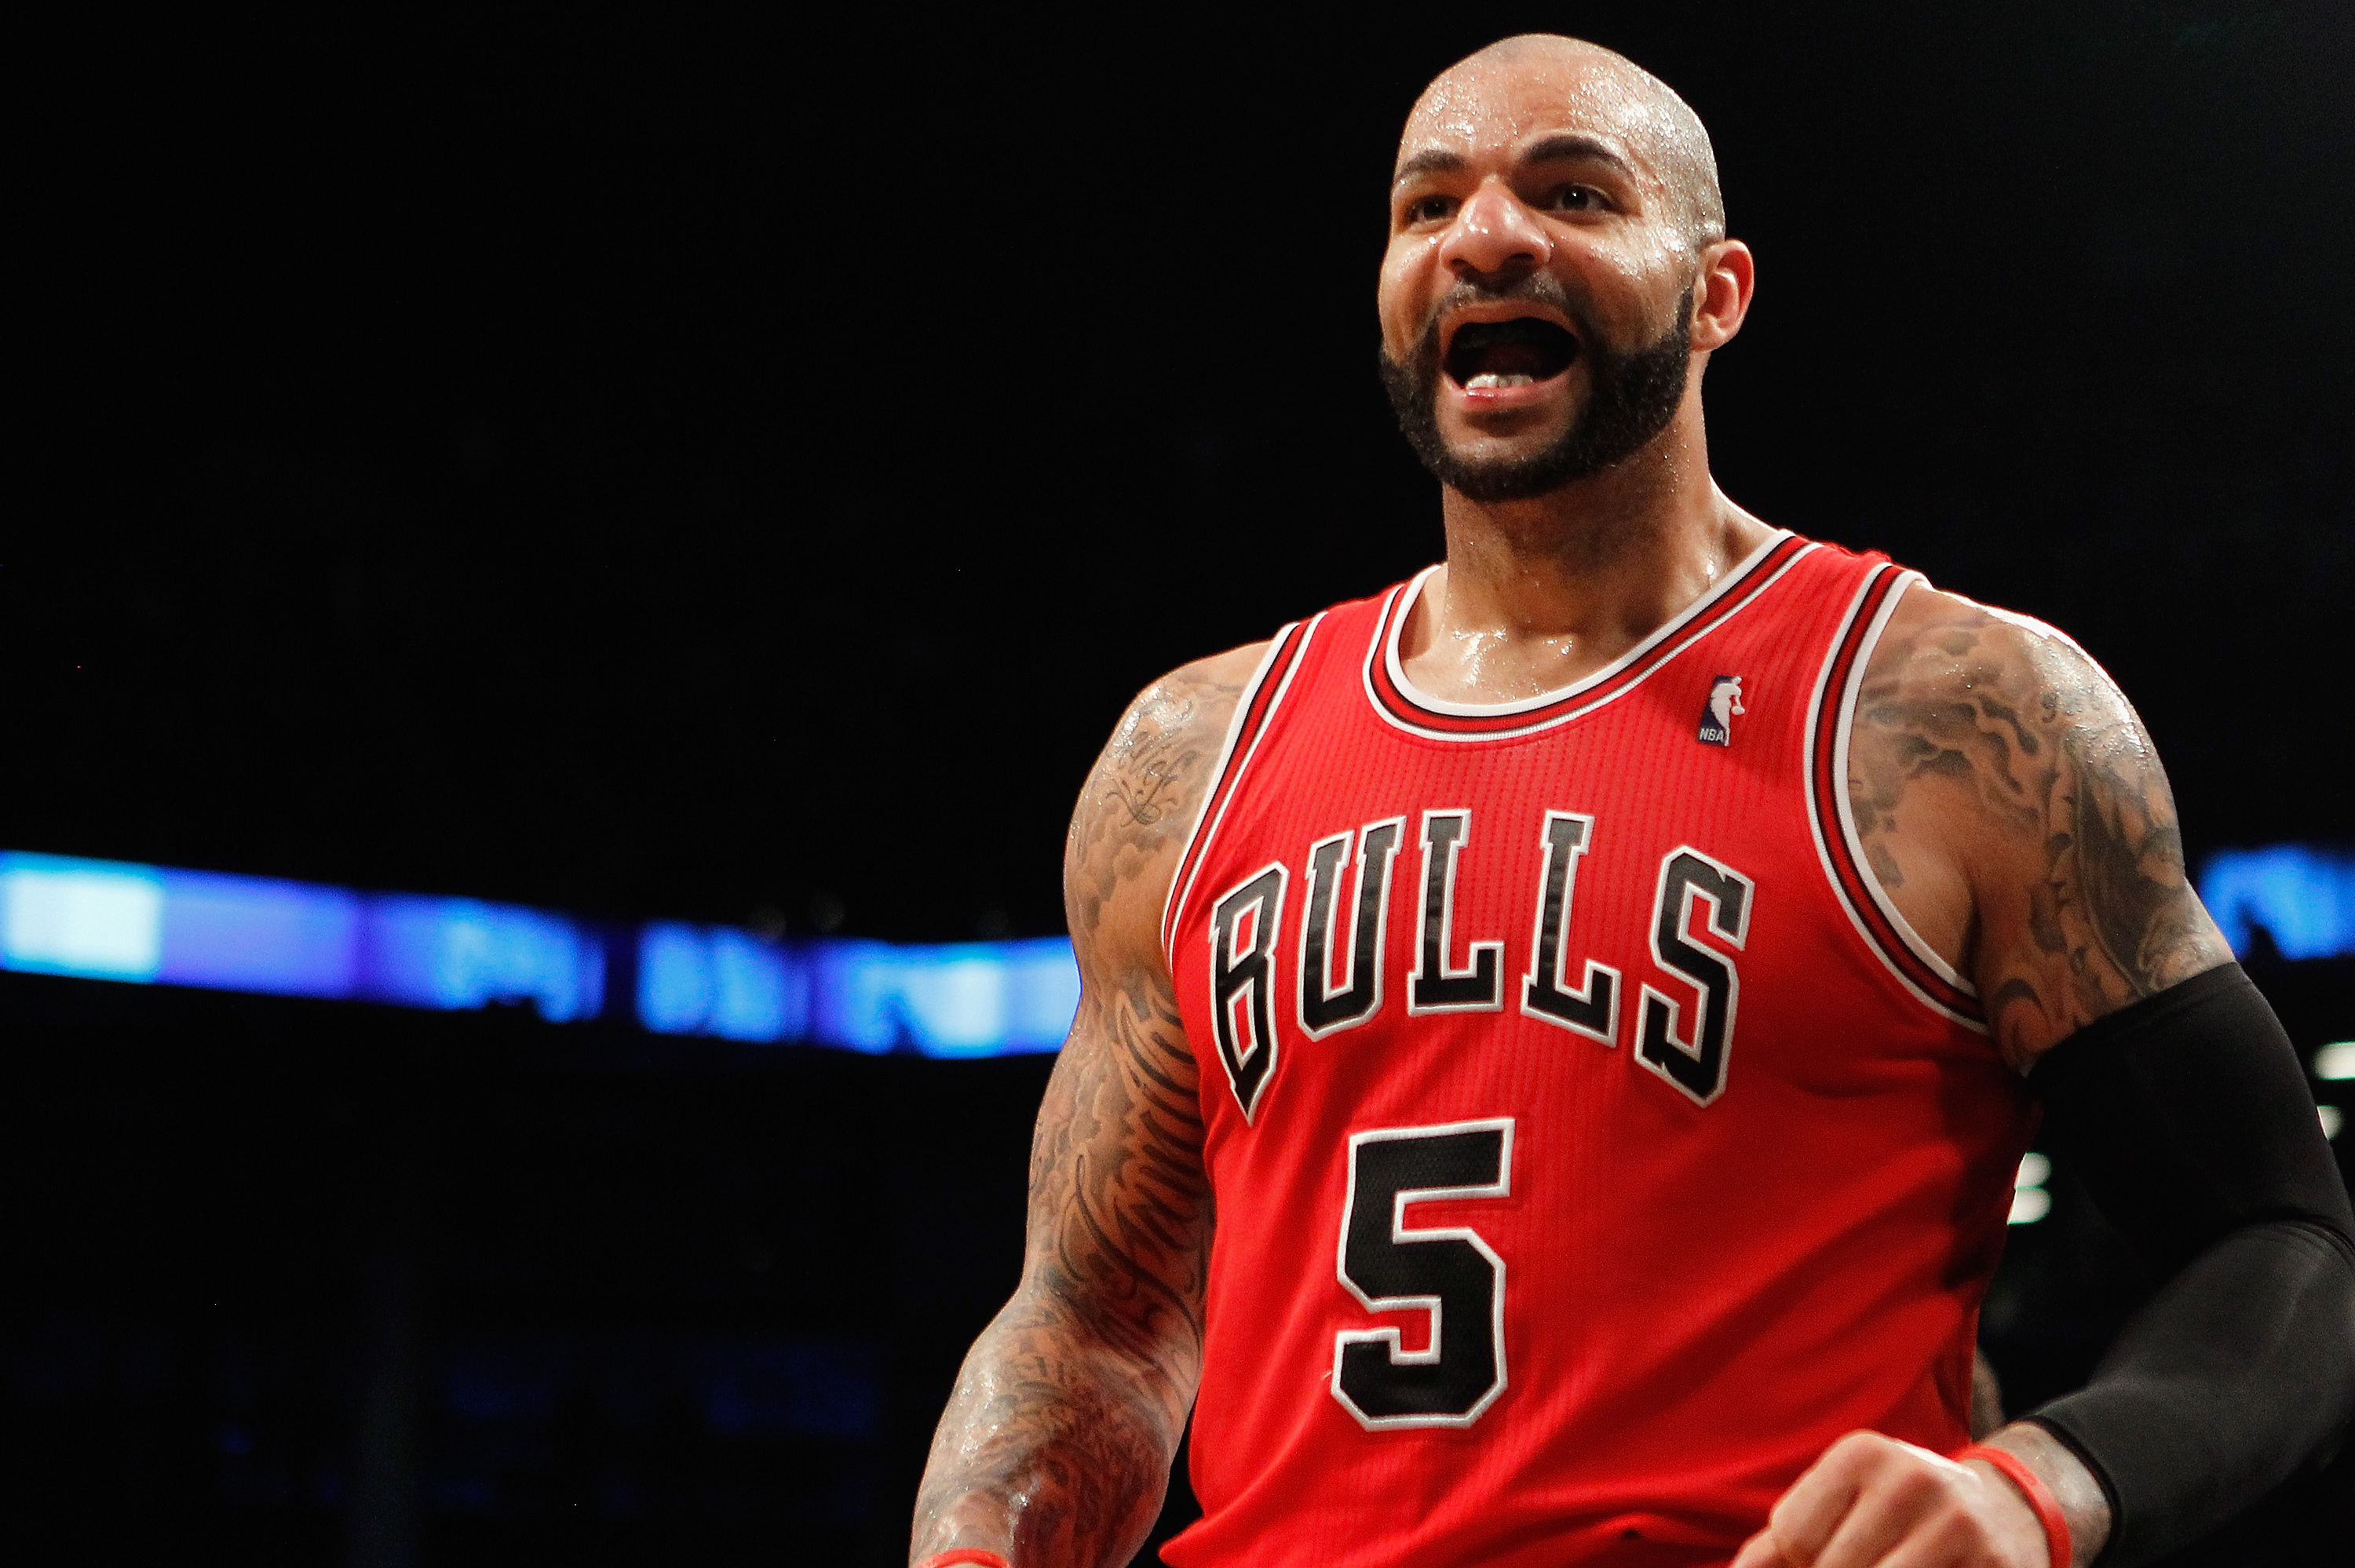 Carlos Boozer on the Bulls: 'If they crank up the defense a little bit,  they'll get those wins